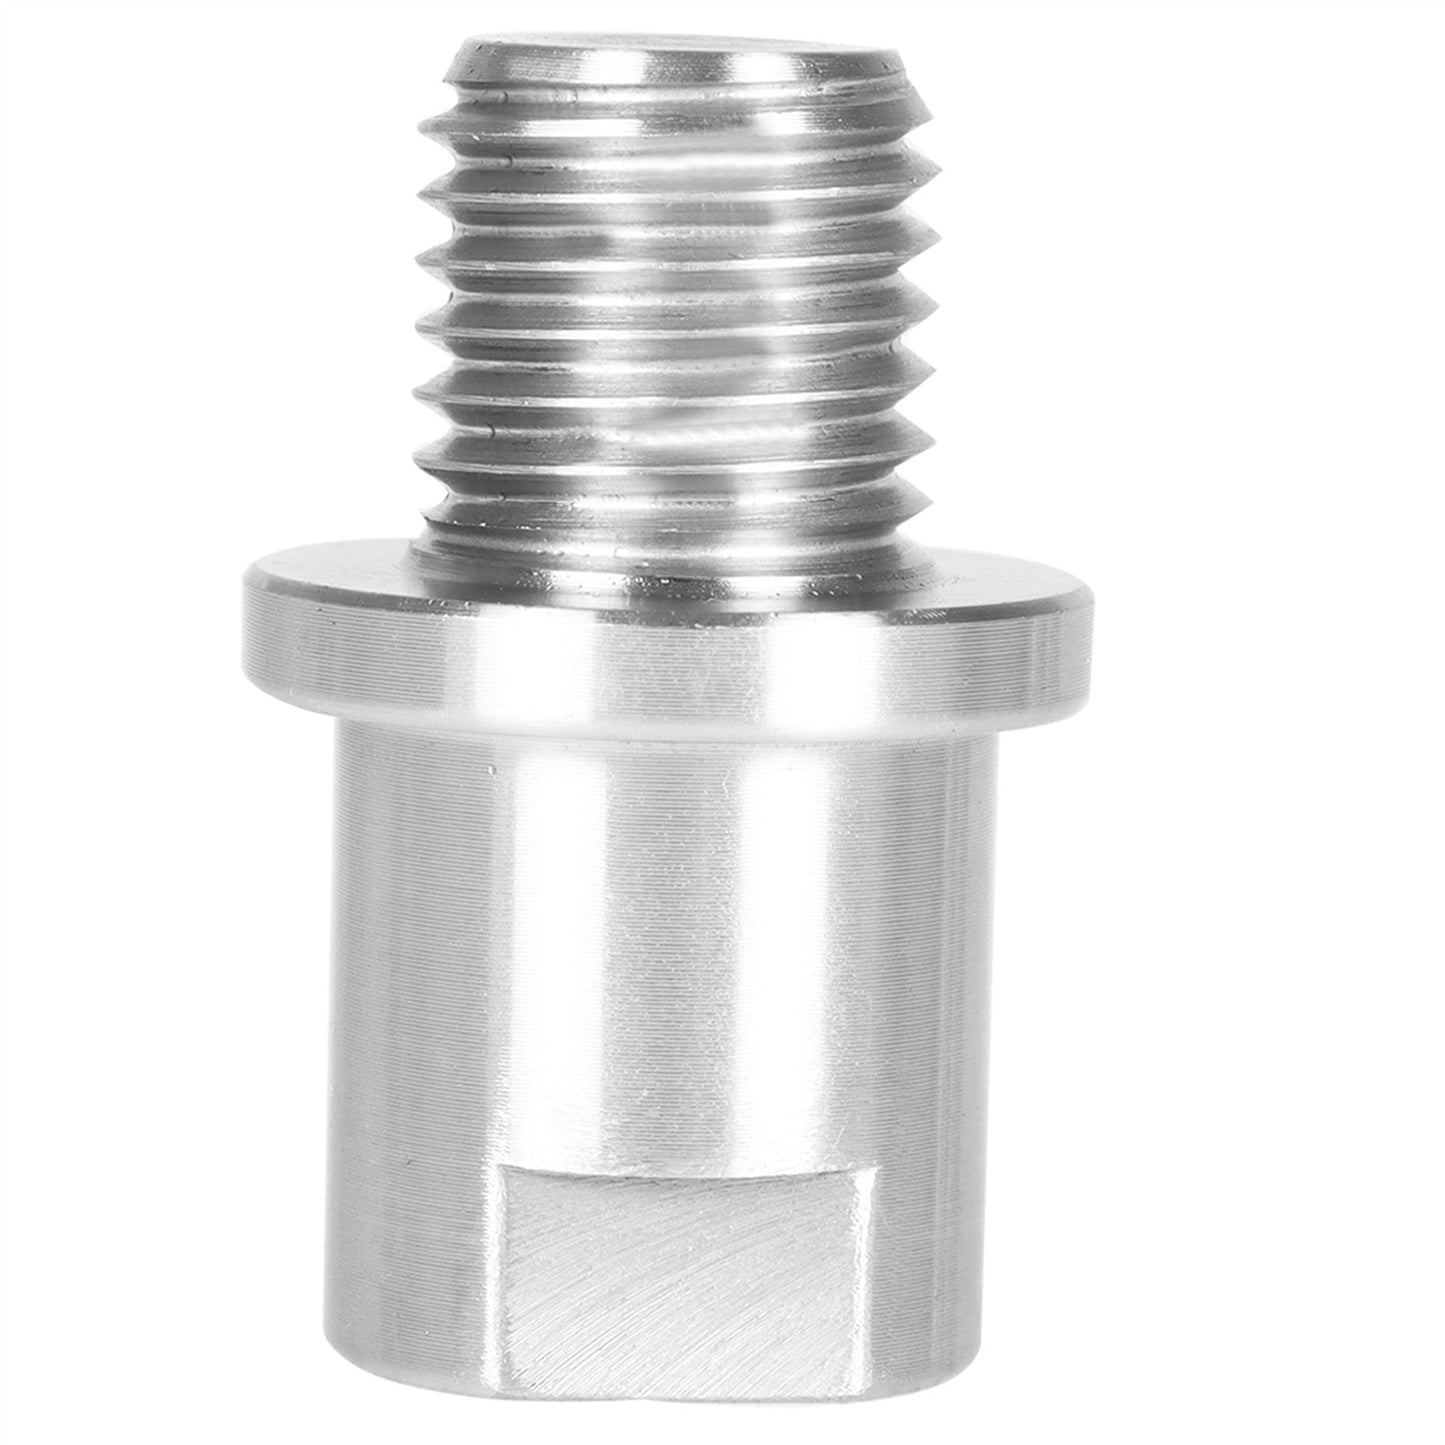 findmall Lathe Headstock Spindle Adapter Converts 3/4 Inch x 10 TPI to 1 Inch x 8TPI for Woodworking Lathe FINDMALLPARTS